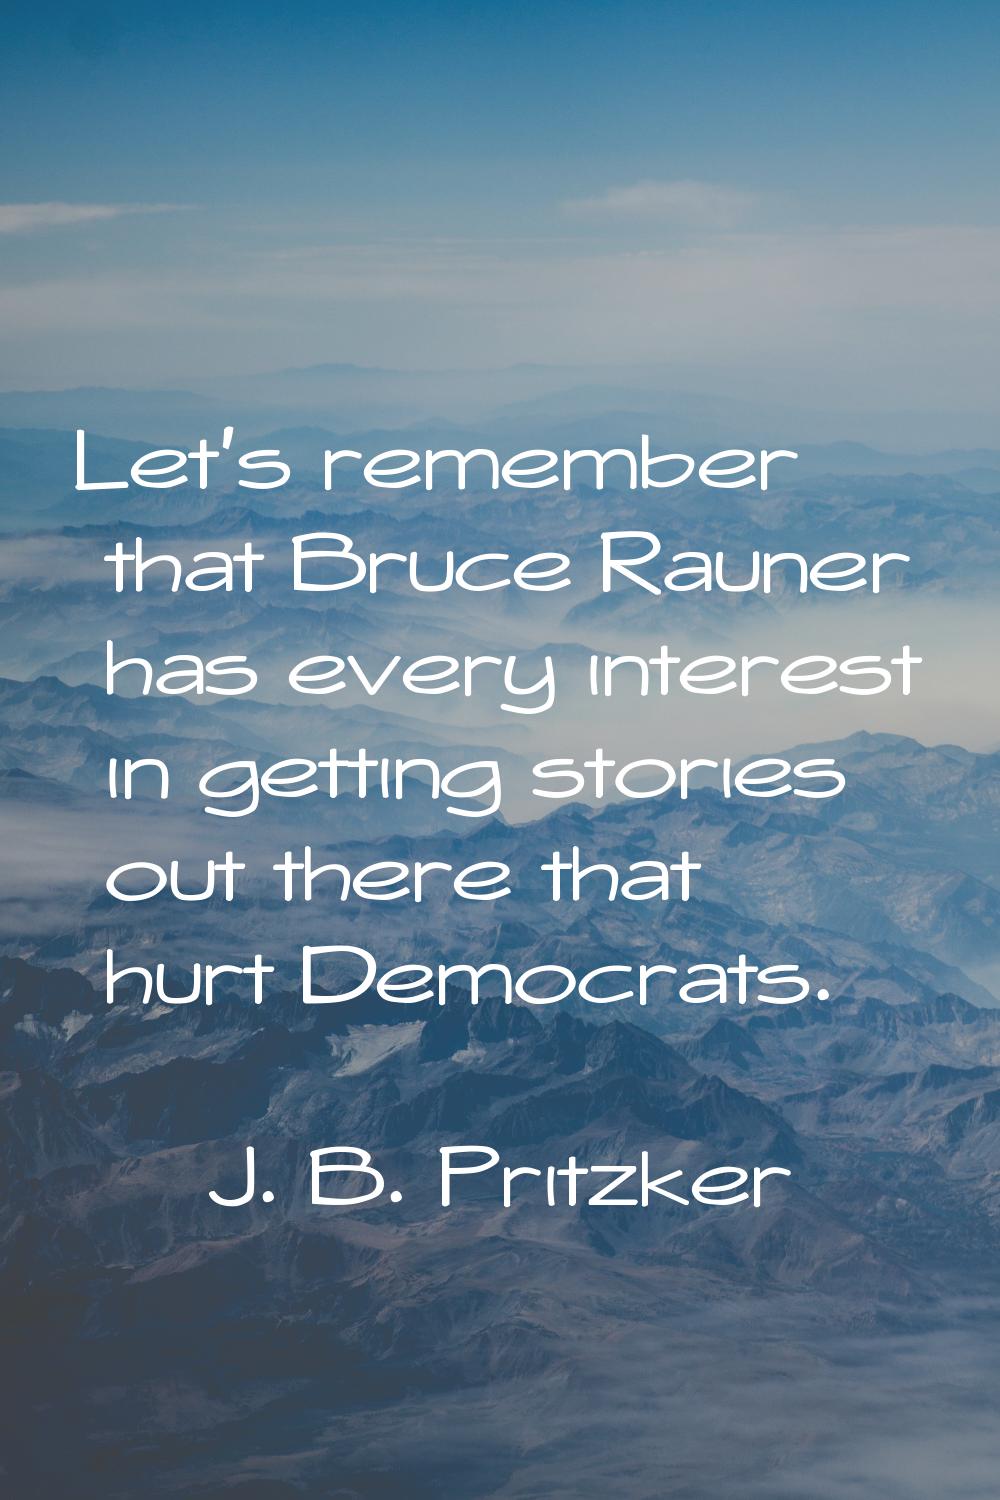 Let's remember that Bruce Rauner has every interest in getting stories out there that hurt Democrat